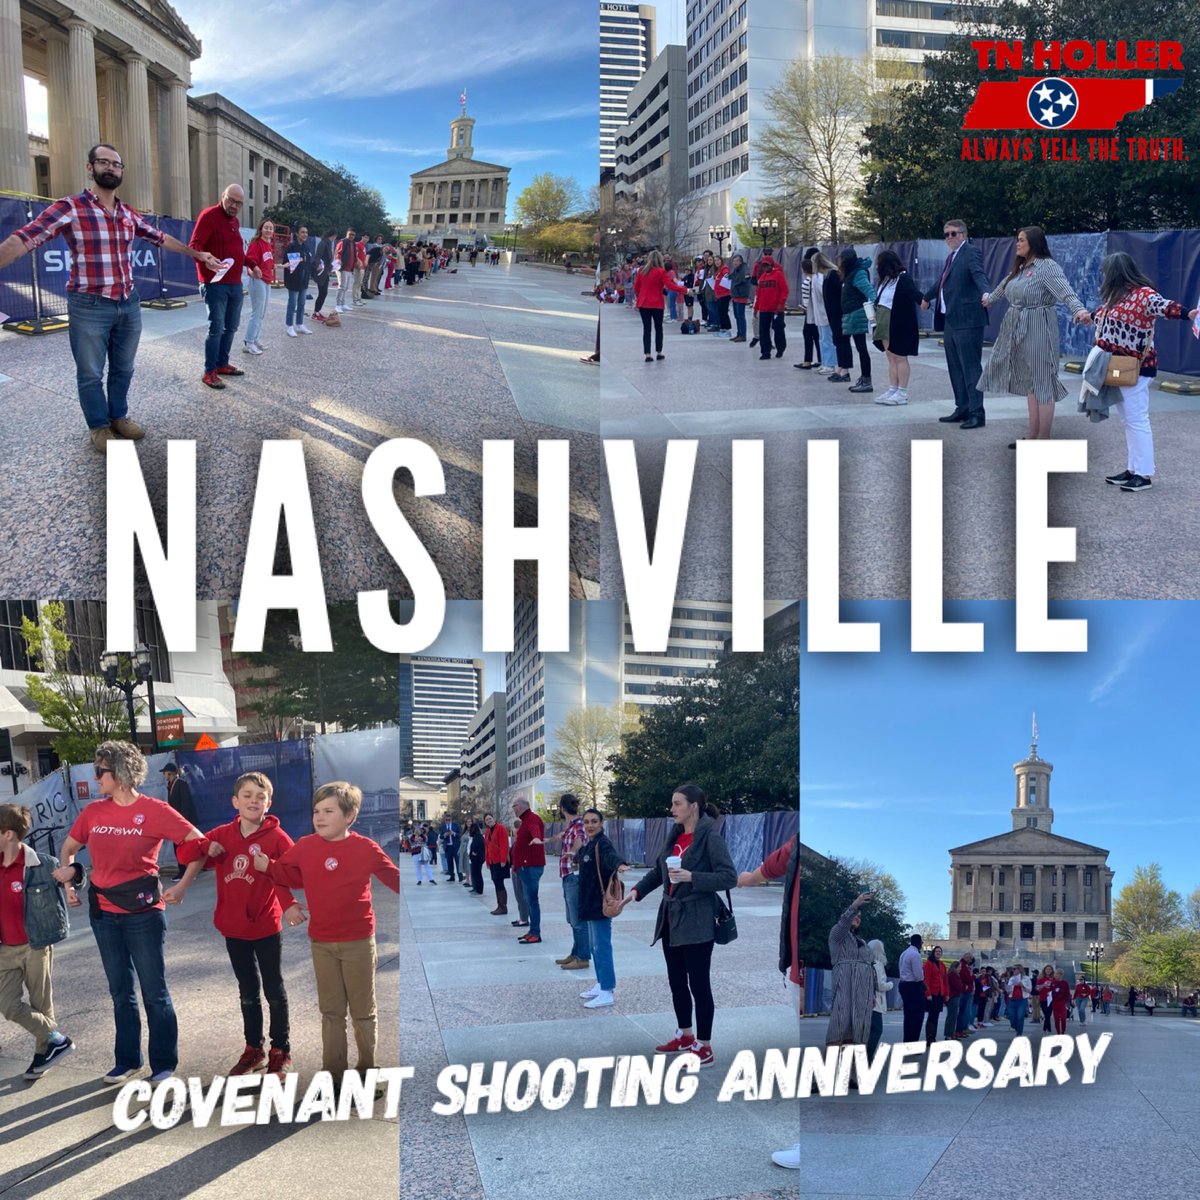 HAPPENING NOW: A human chain from Vanderbilt Hospital to the Capitol in NASHVILLE to protest the fact that nothing has changed, no gun safety laws have passed to protect kids in schools — on the anniversary of the Covenant shooting.